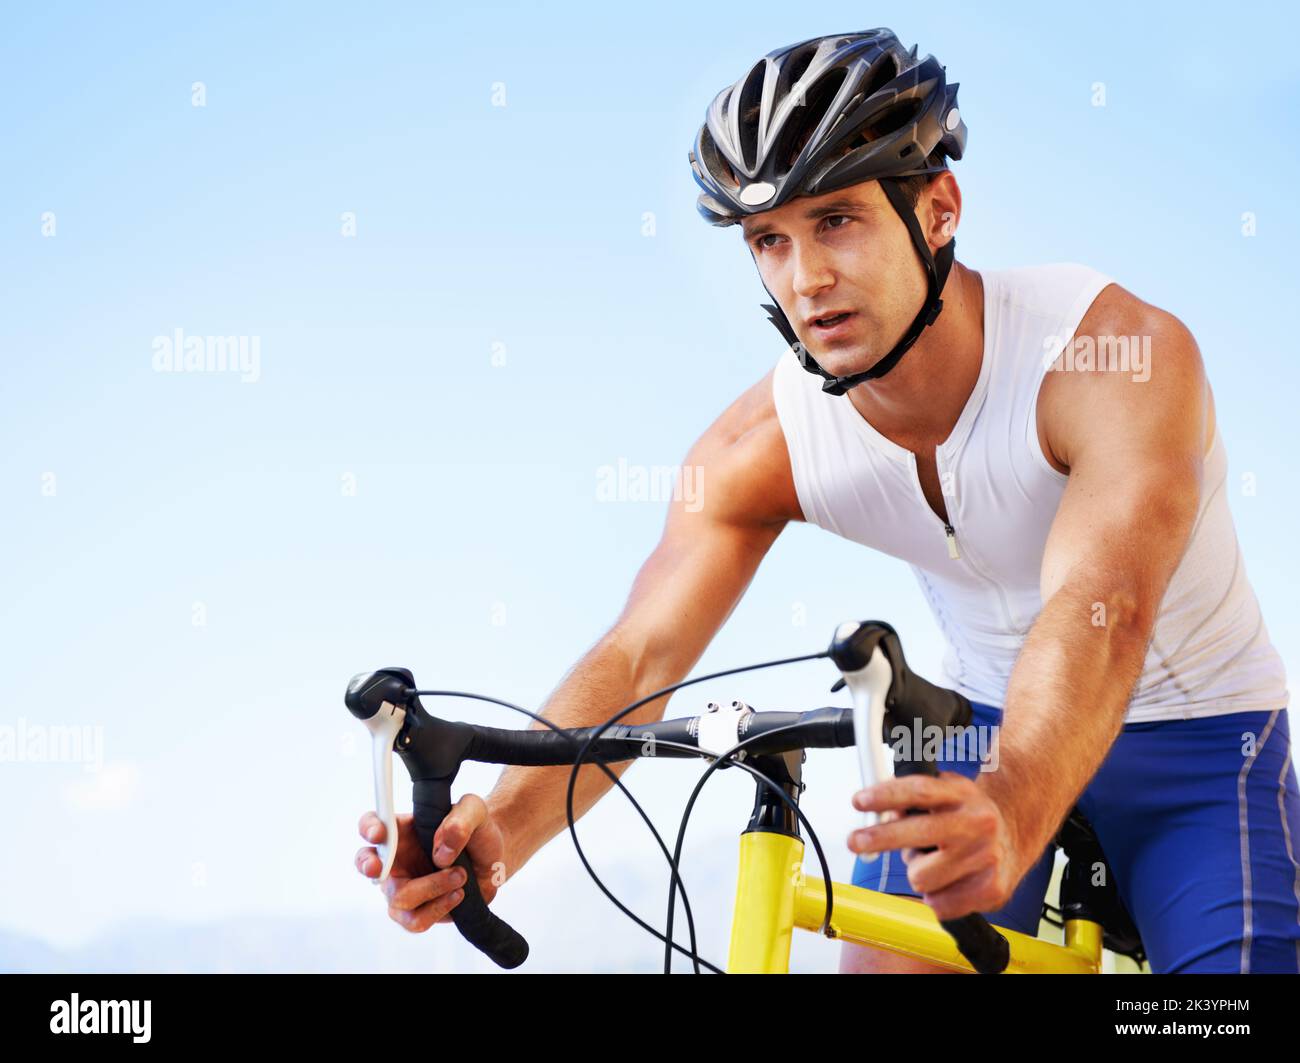 Enjoying the scenery while exercising. Cropped view of a cyclist cycling along an ocean road. Stock Photo